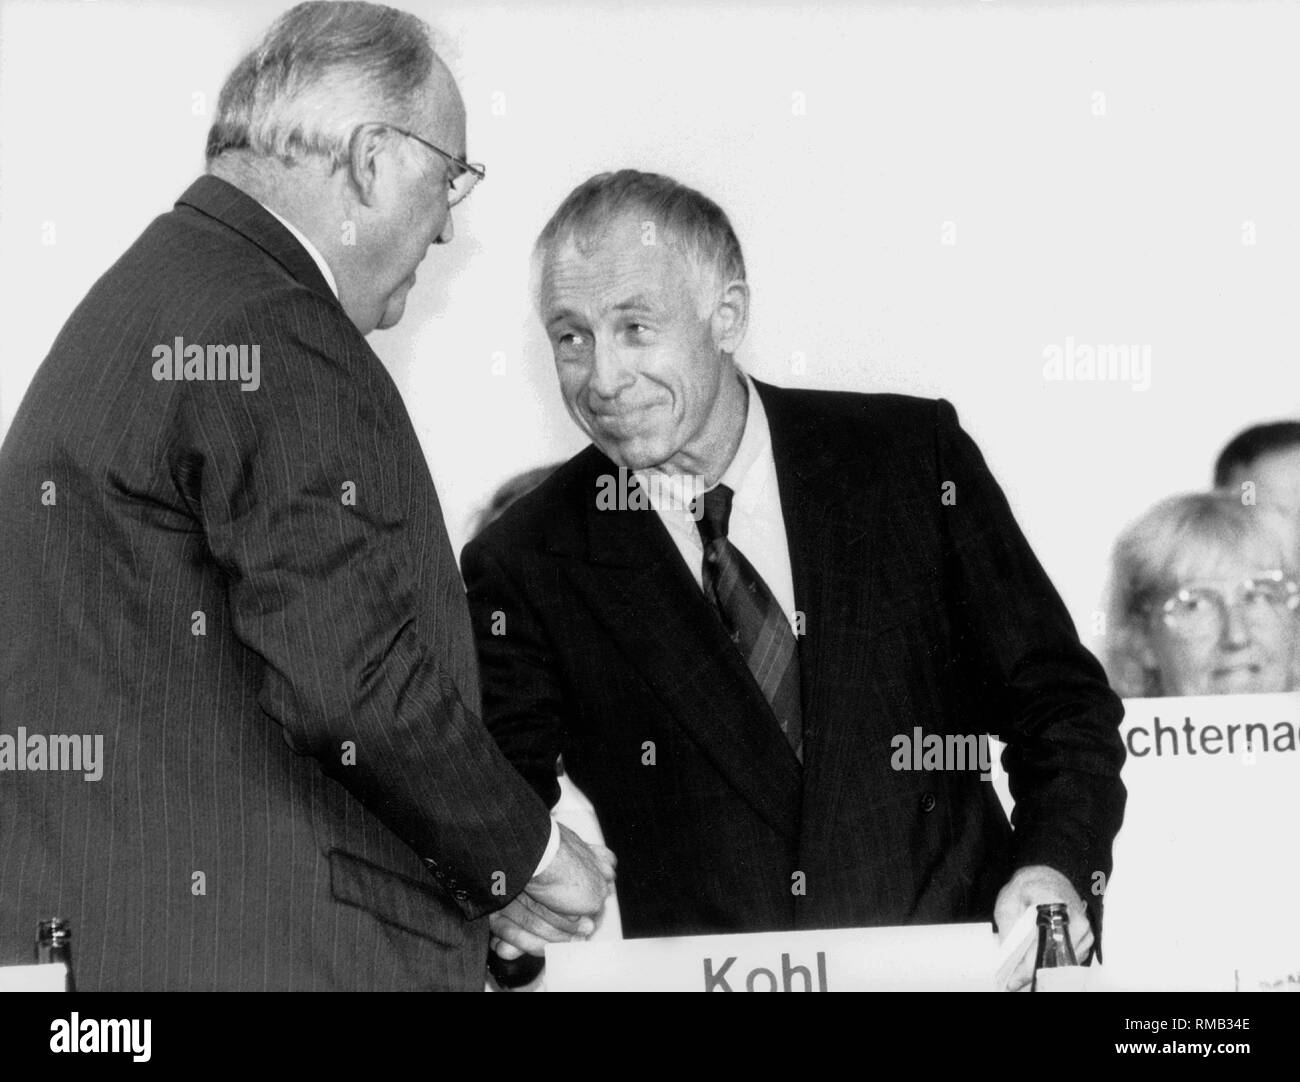 Chancellor and CDU party leader Helmut Kohl (left) and Secretary General Heiner Geissler shake hands at the CDU party convention in Bremen. Stock Photo